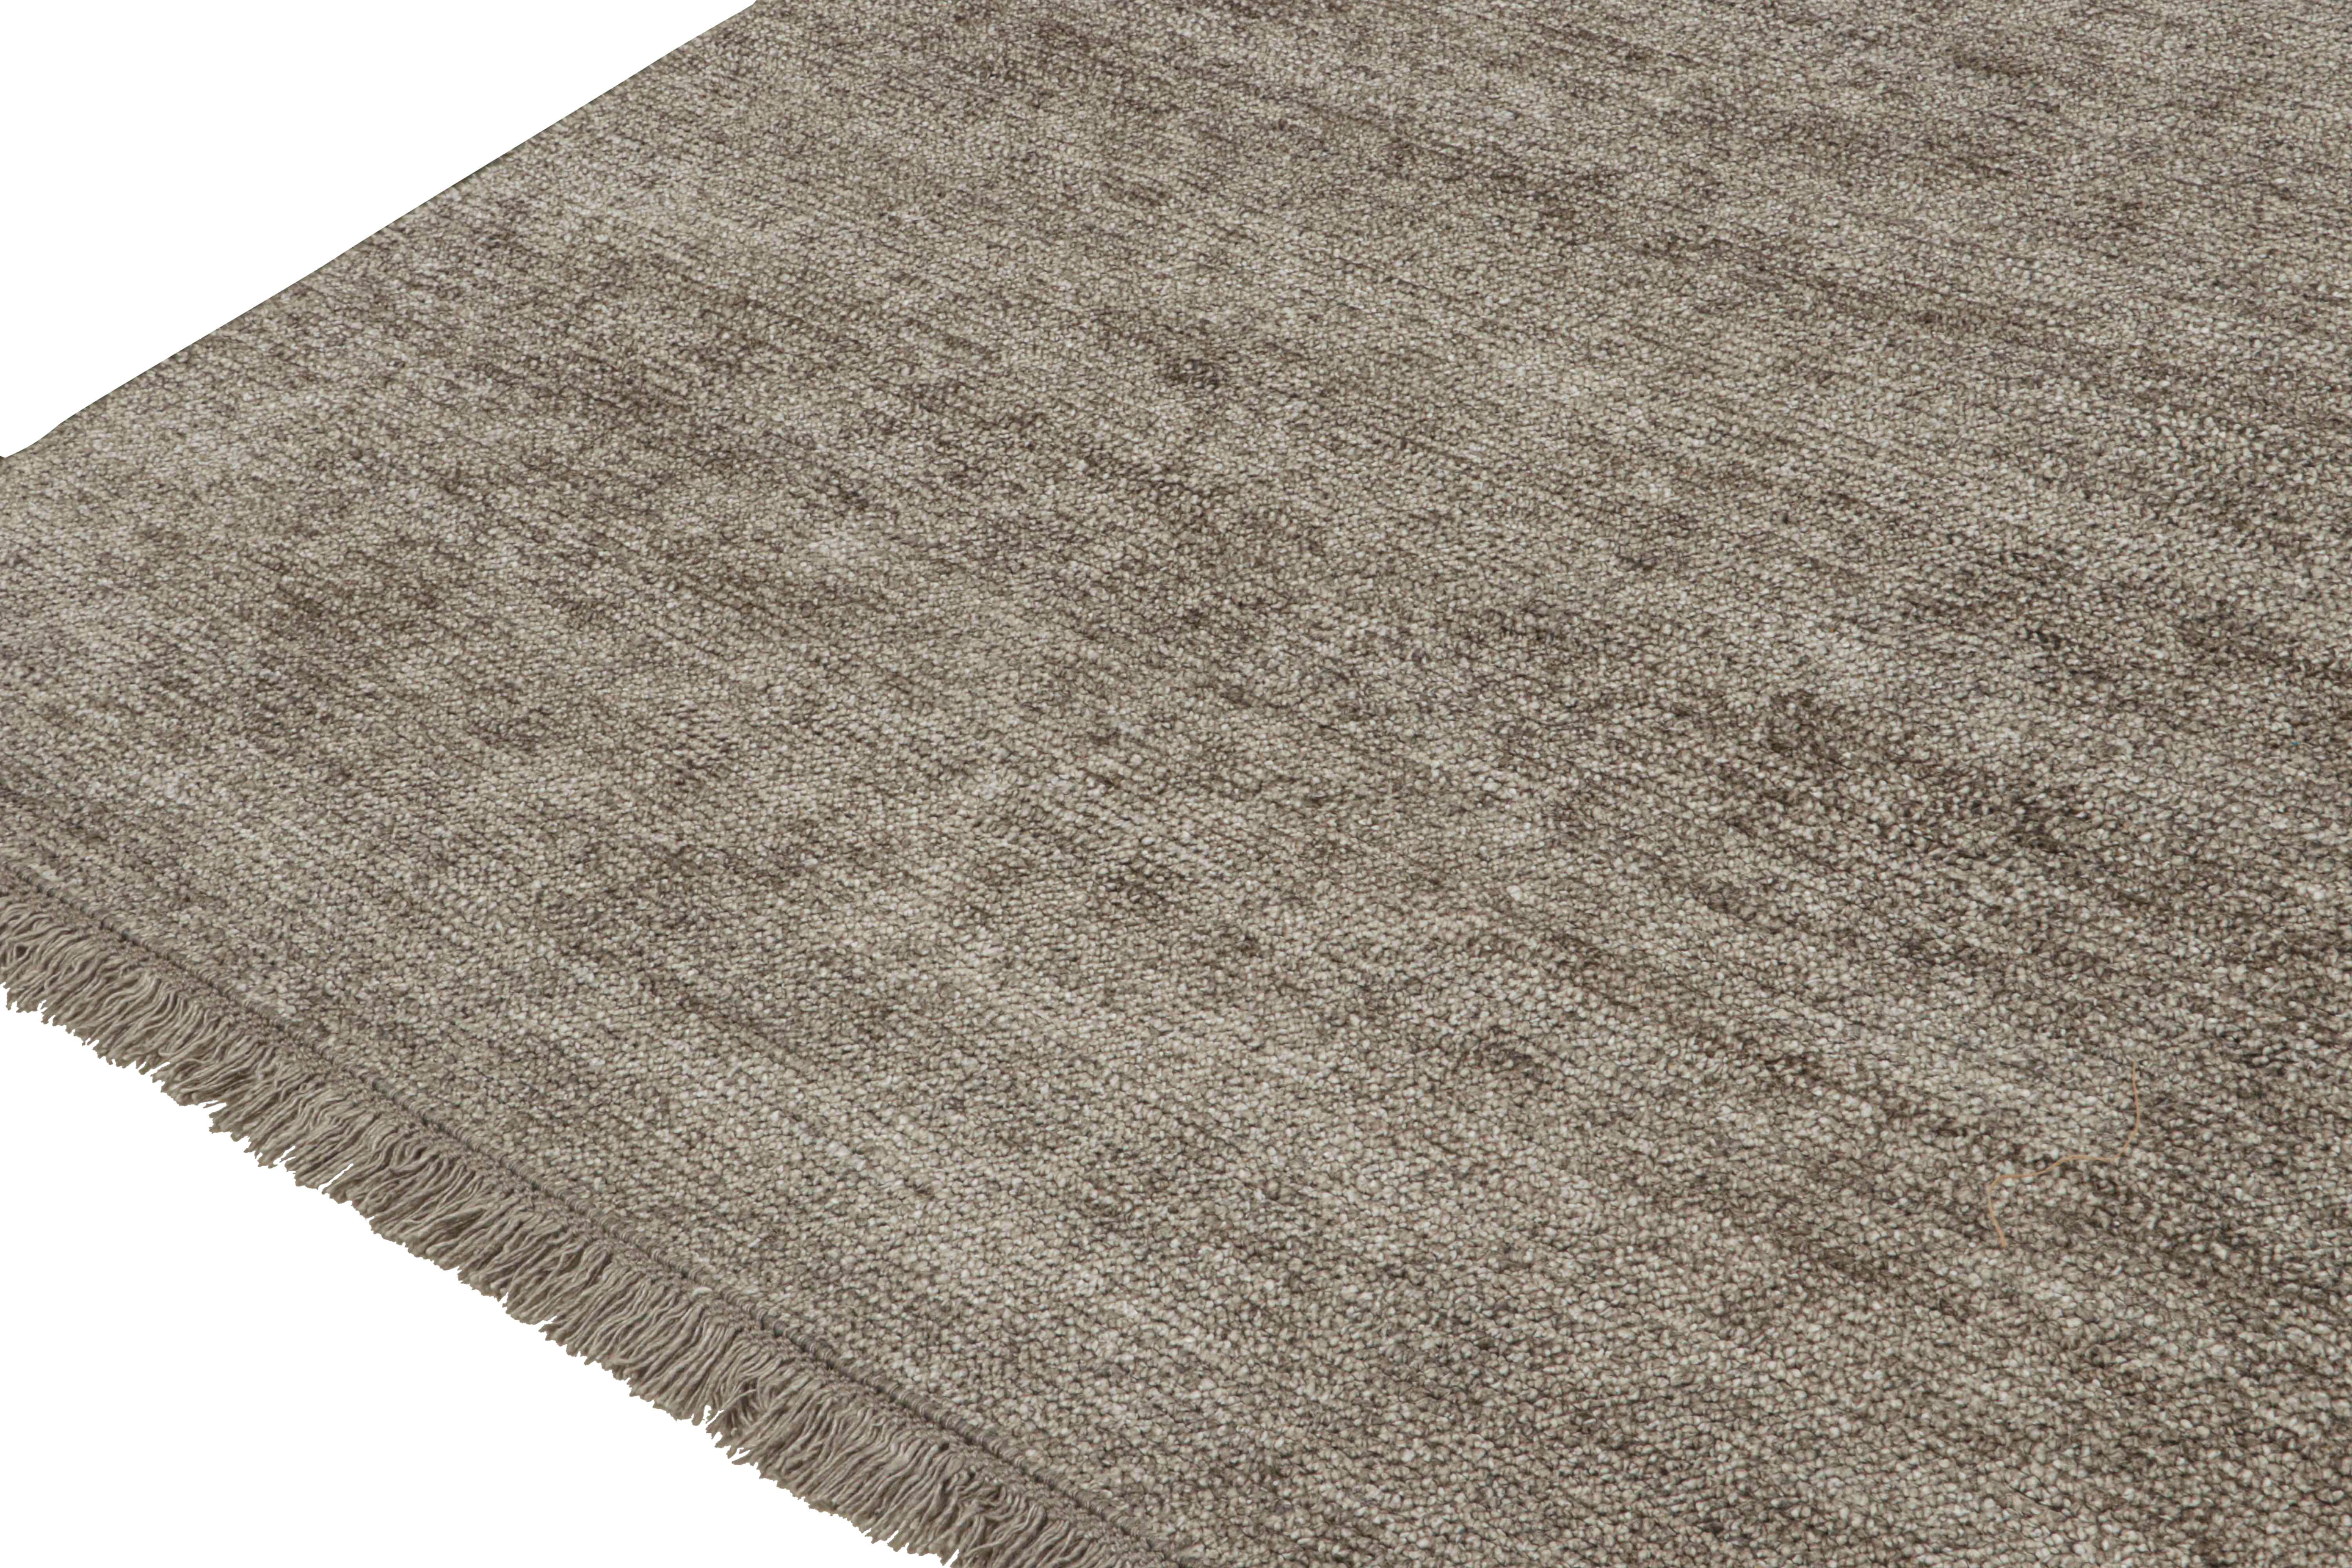 Rug & Kilim’s Modern rug in Solid Silver-Gray Tone-on-Tone Striae In New Condition For Sale In Long Island City, NY